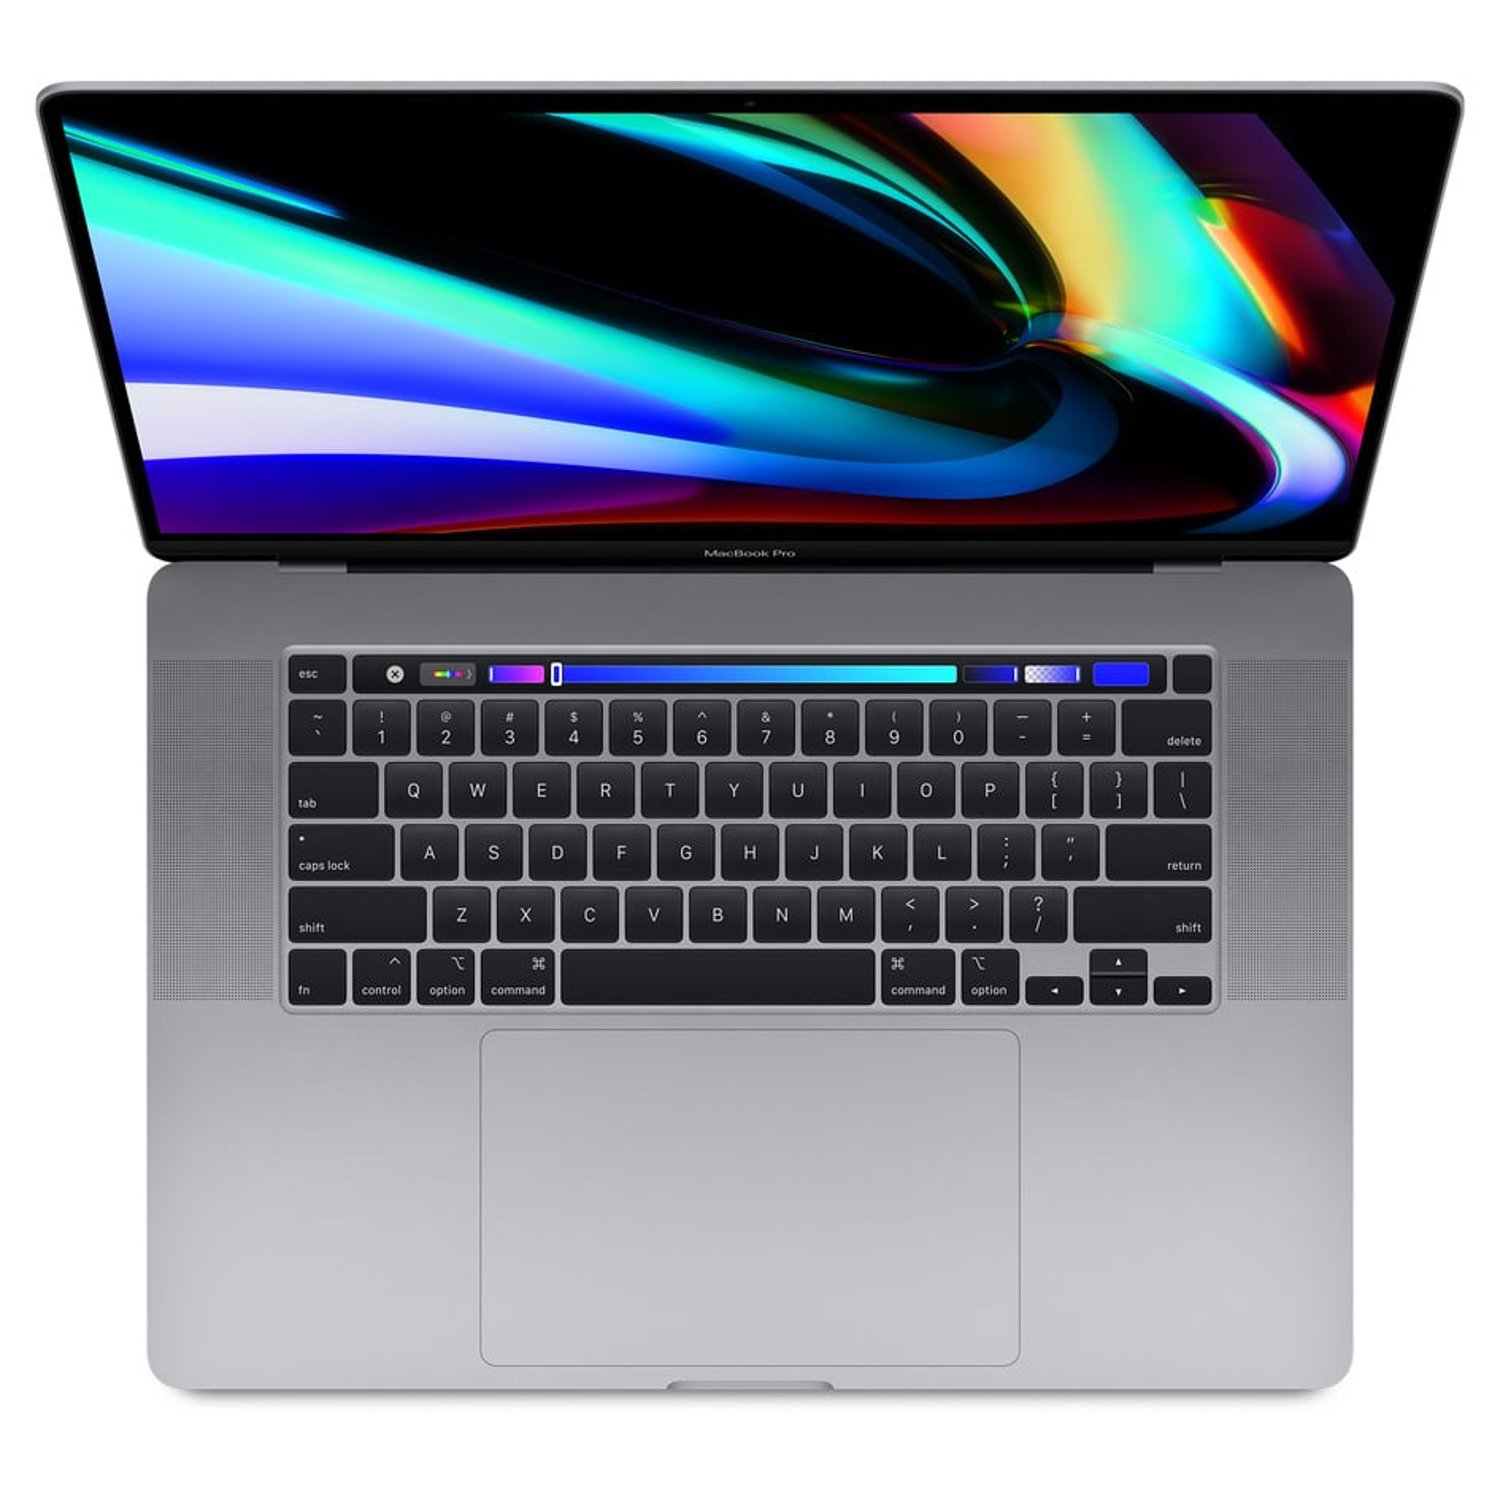 Apple MacBook Pro A1990 (2018) Core i7 2.3GHz | 16GB RAM | 512GB SSD | 15 inch Retina Touch Bar | Space Gray